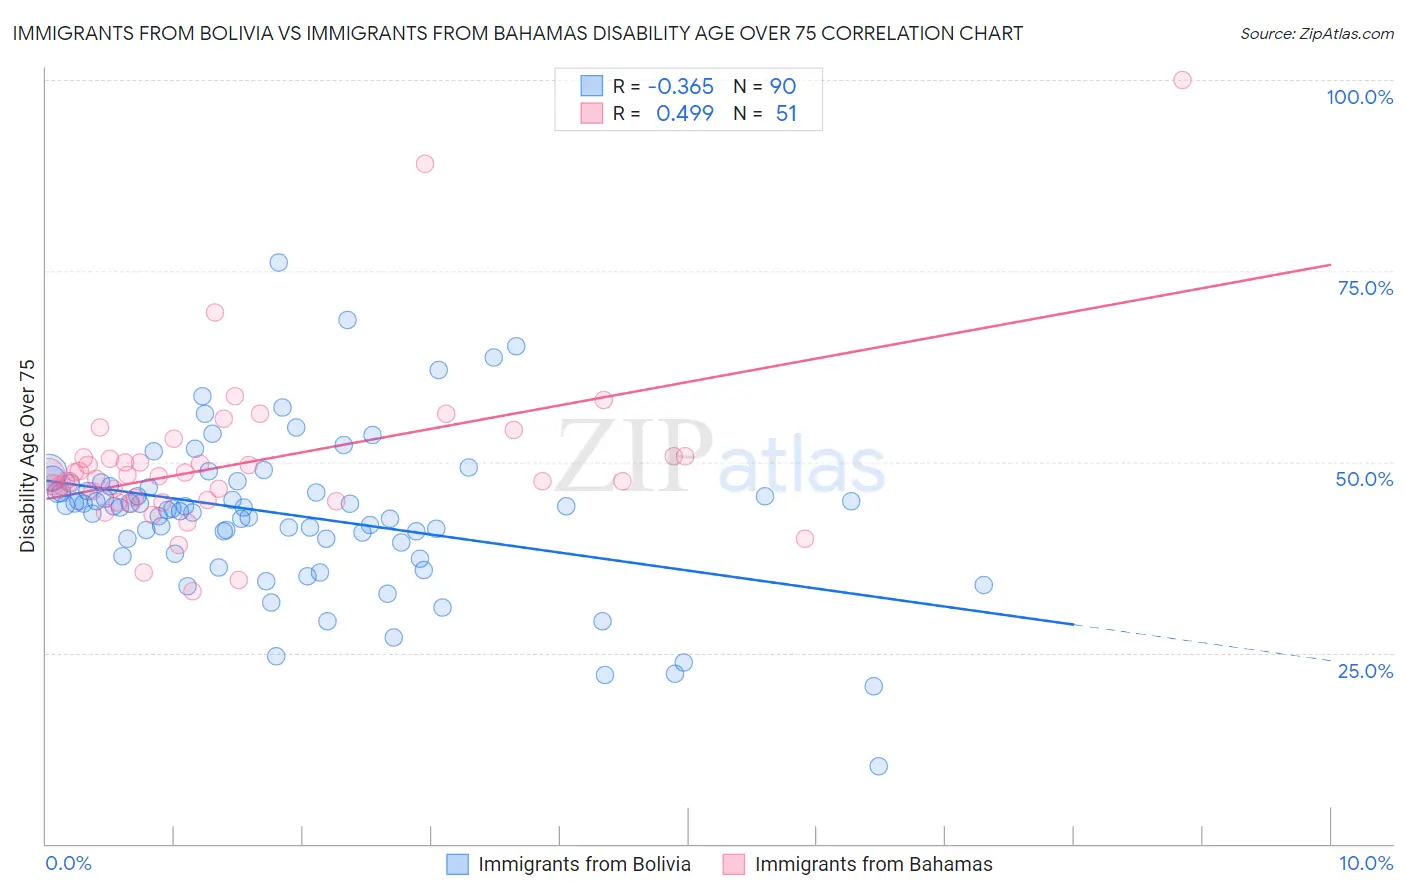 Immigrants from Bolivia vs Immigrants from Bahamas Disability Age Over 75